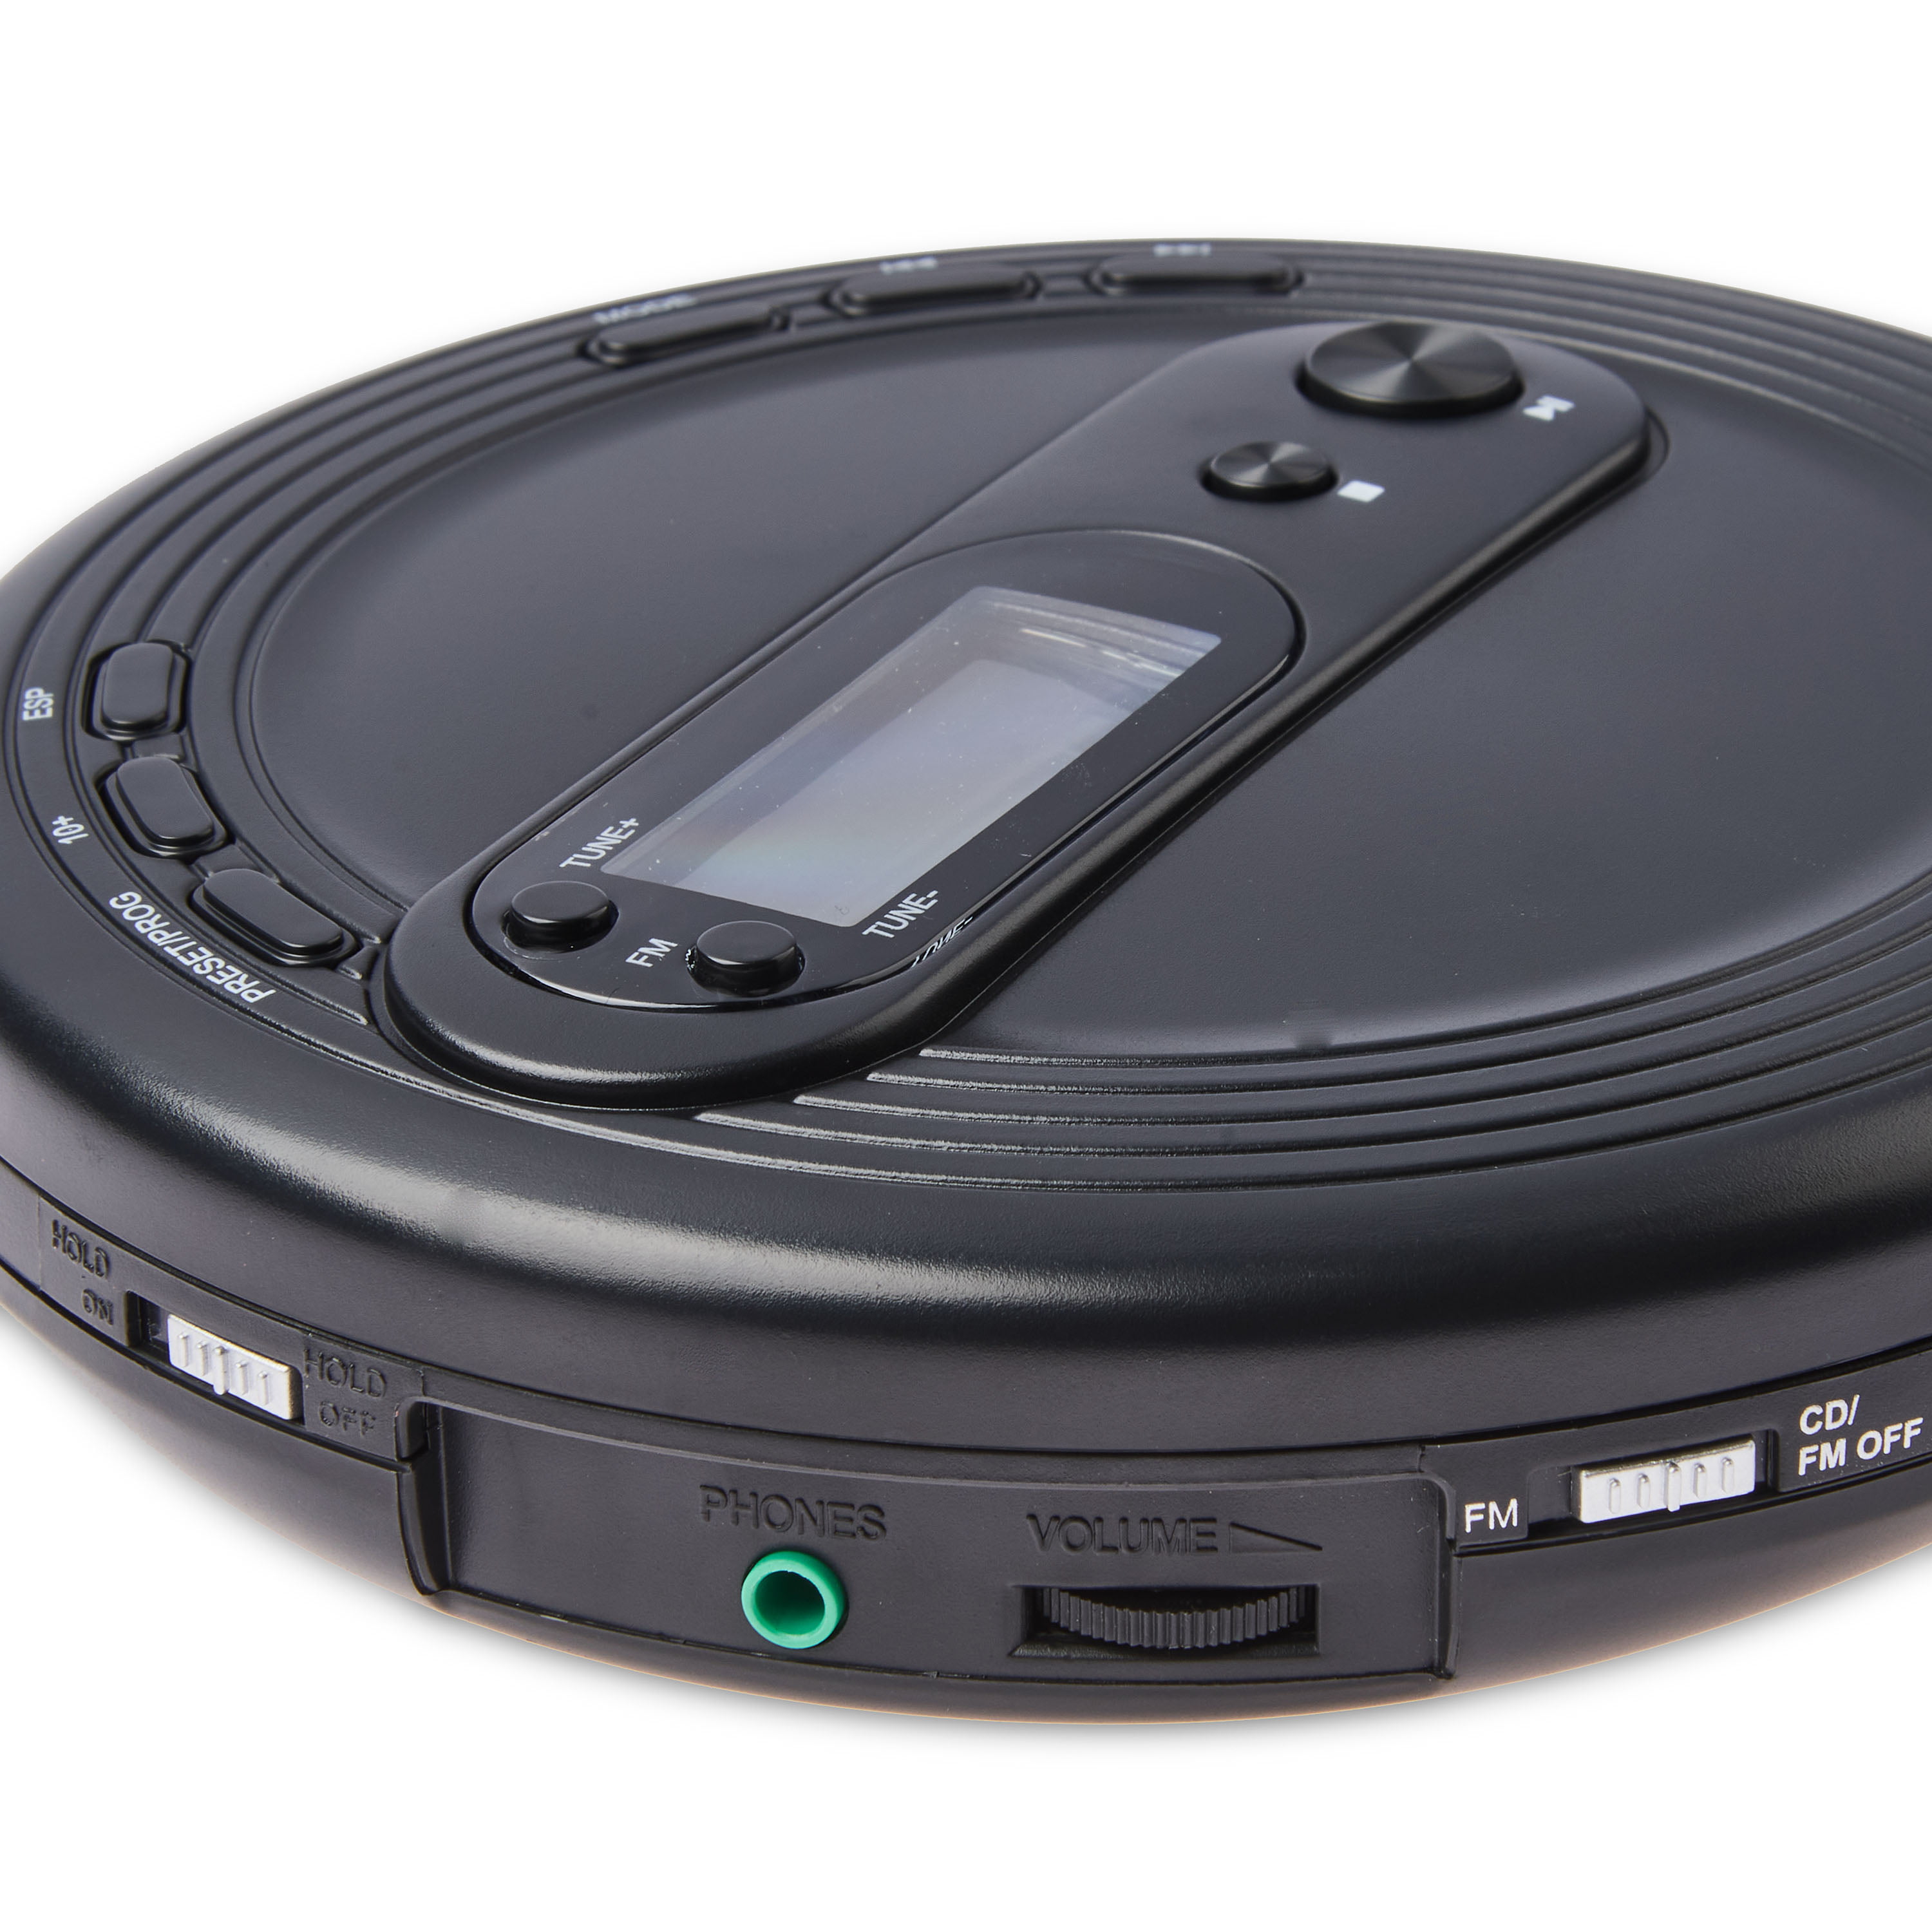 ONN personal/portable CD player with FM radio 